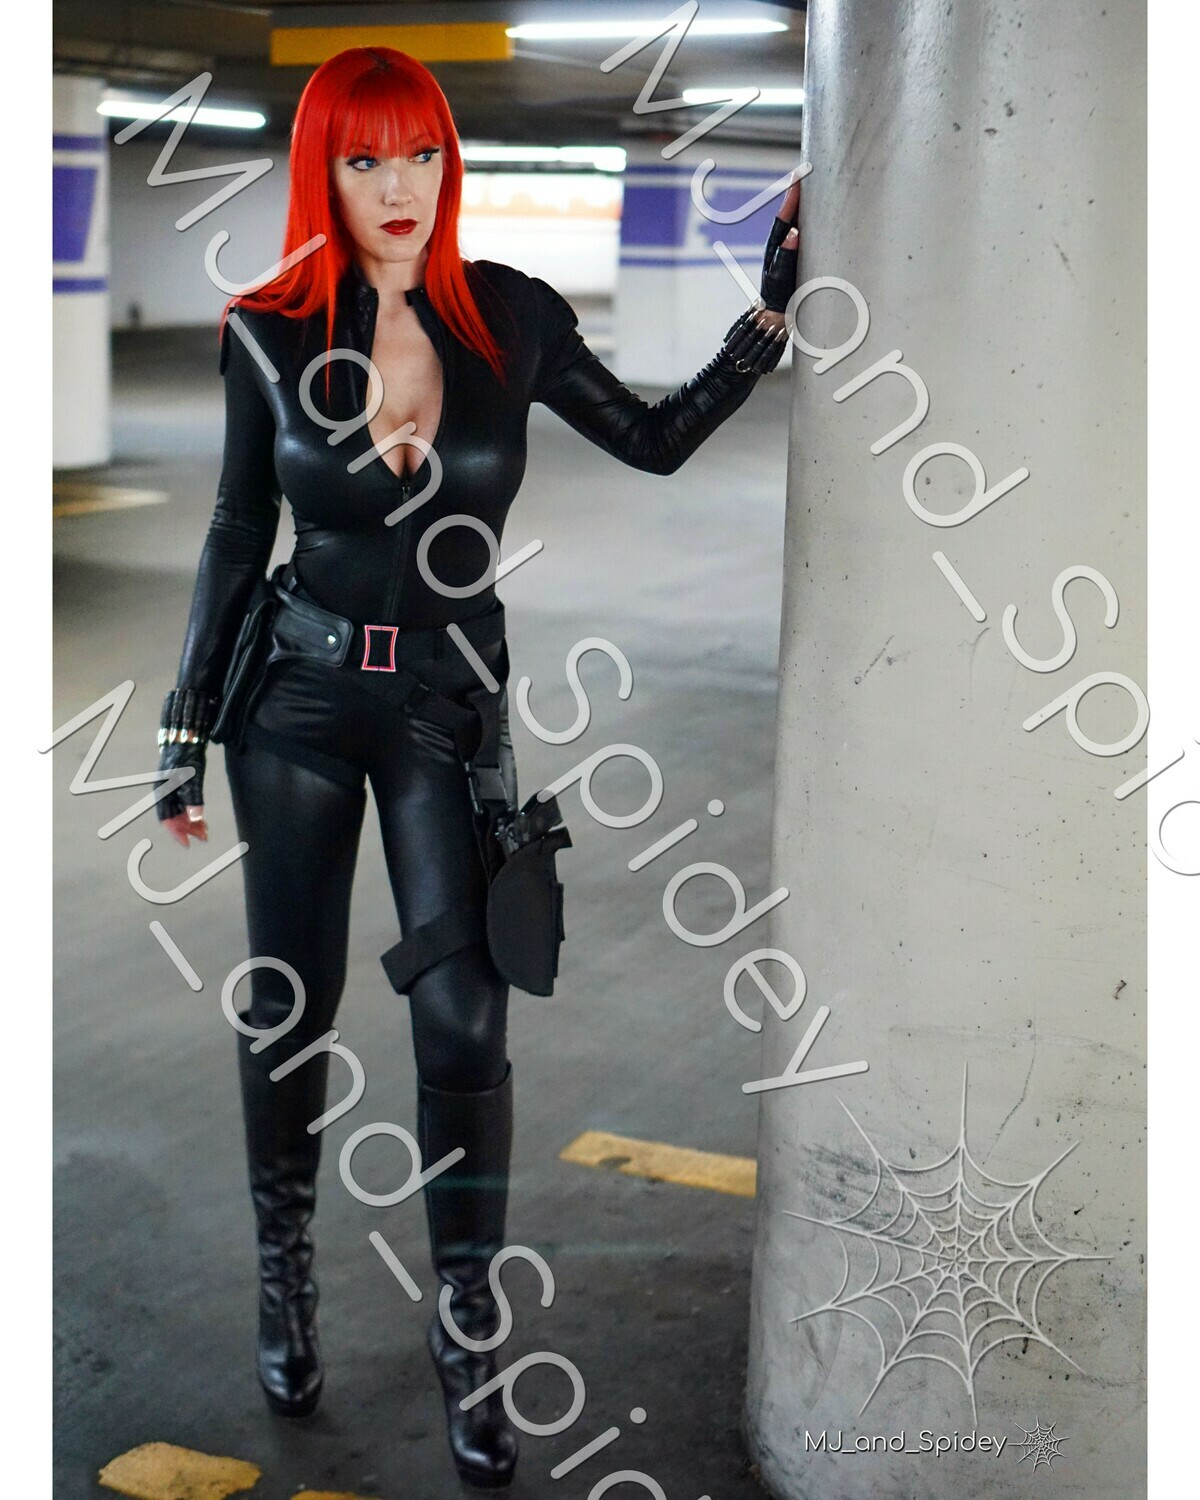 Marvel - Avengers - Black Widow 6 -  Cosplay Print (@MJ_and_Spidey, MJ and Spidey, Comics)